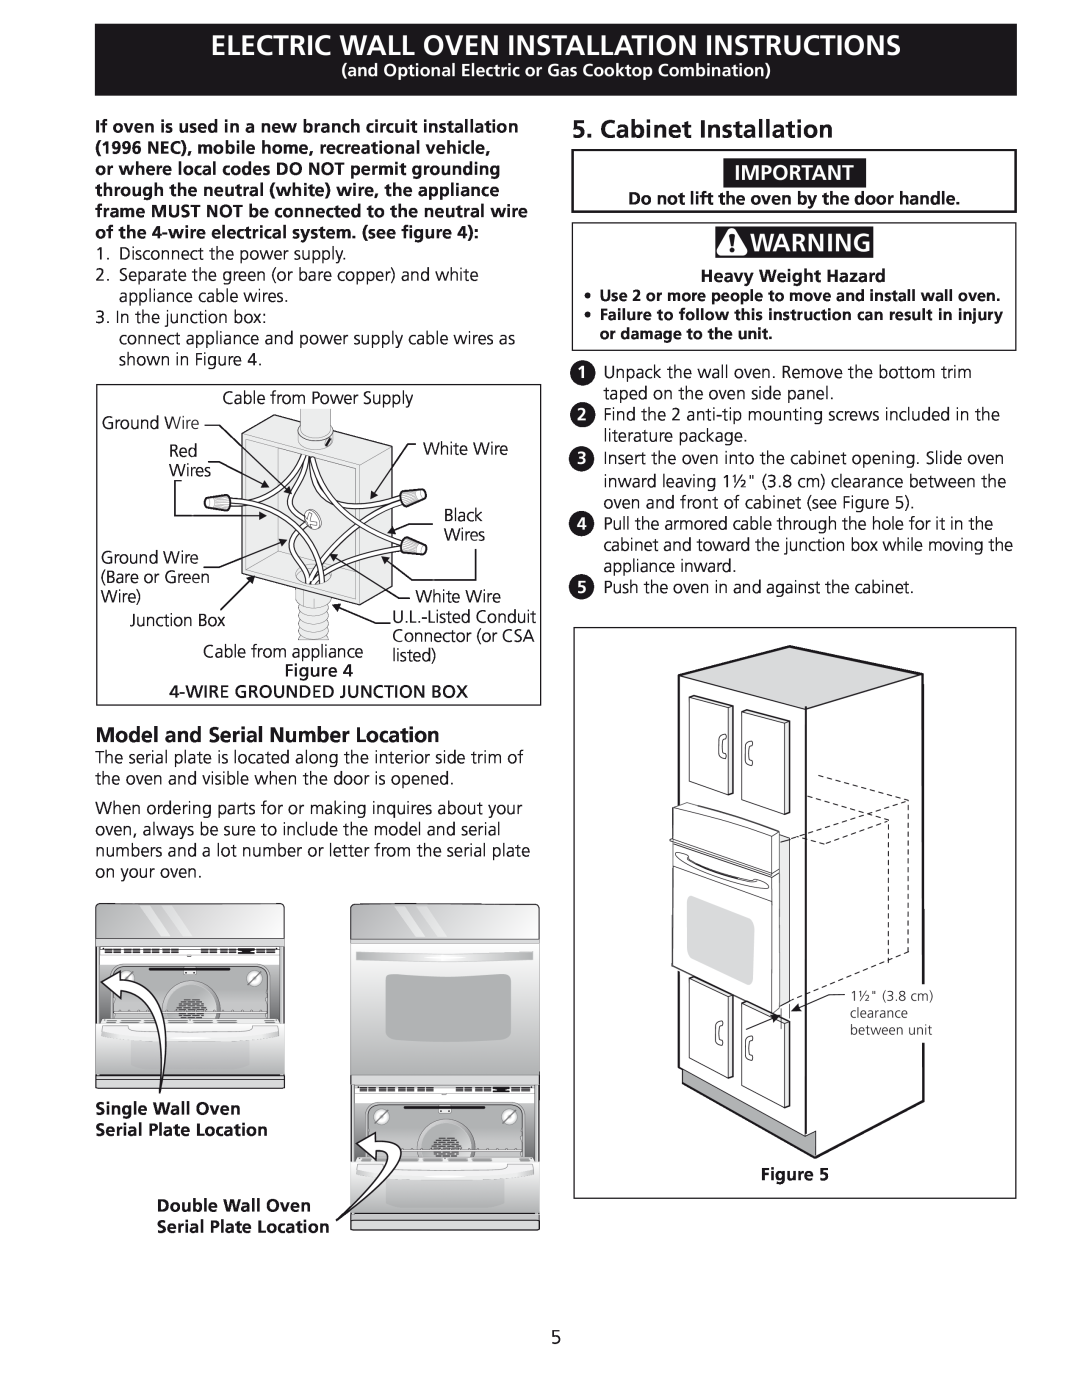 Frigidaire 318201532 Cabinet Installation, Model and Serial Number Location, Electric Wall Oven Installation Instructions 